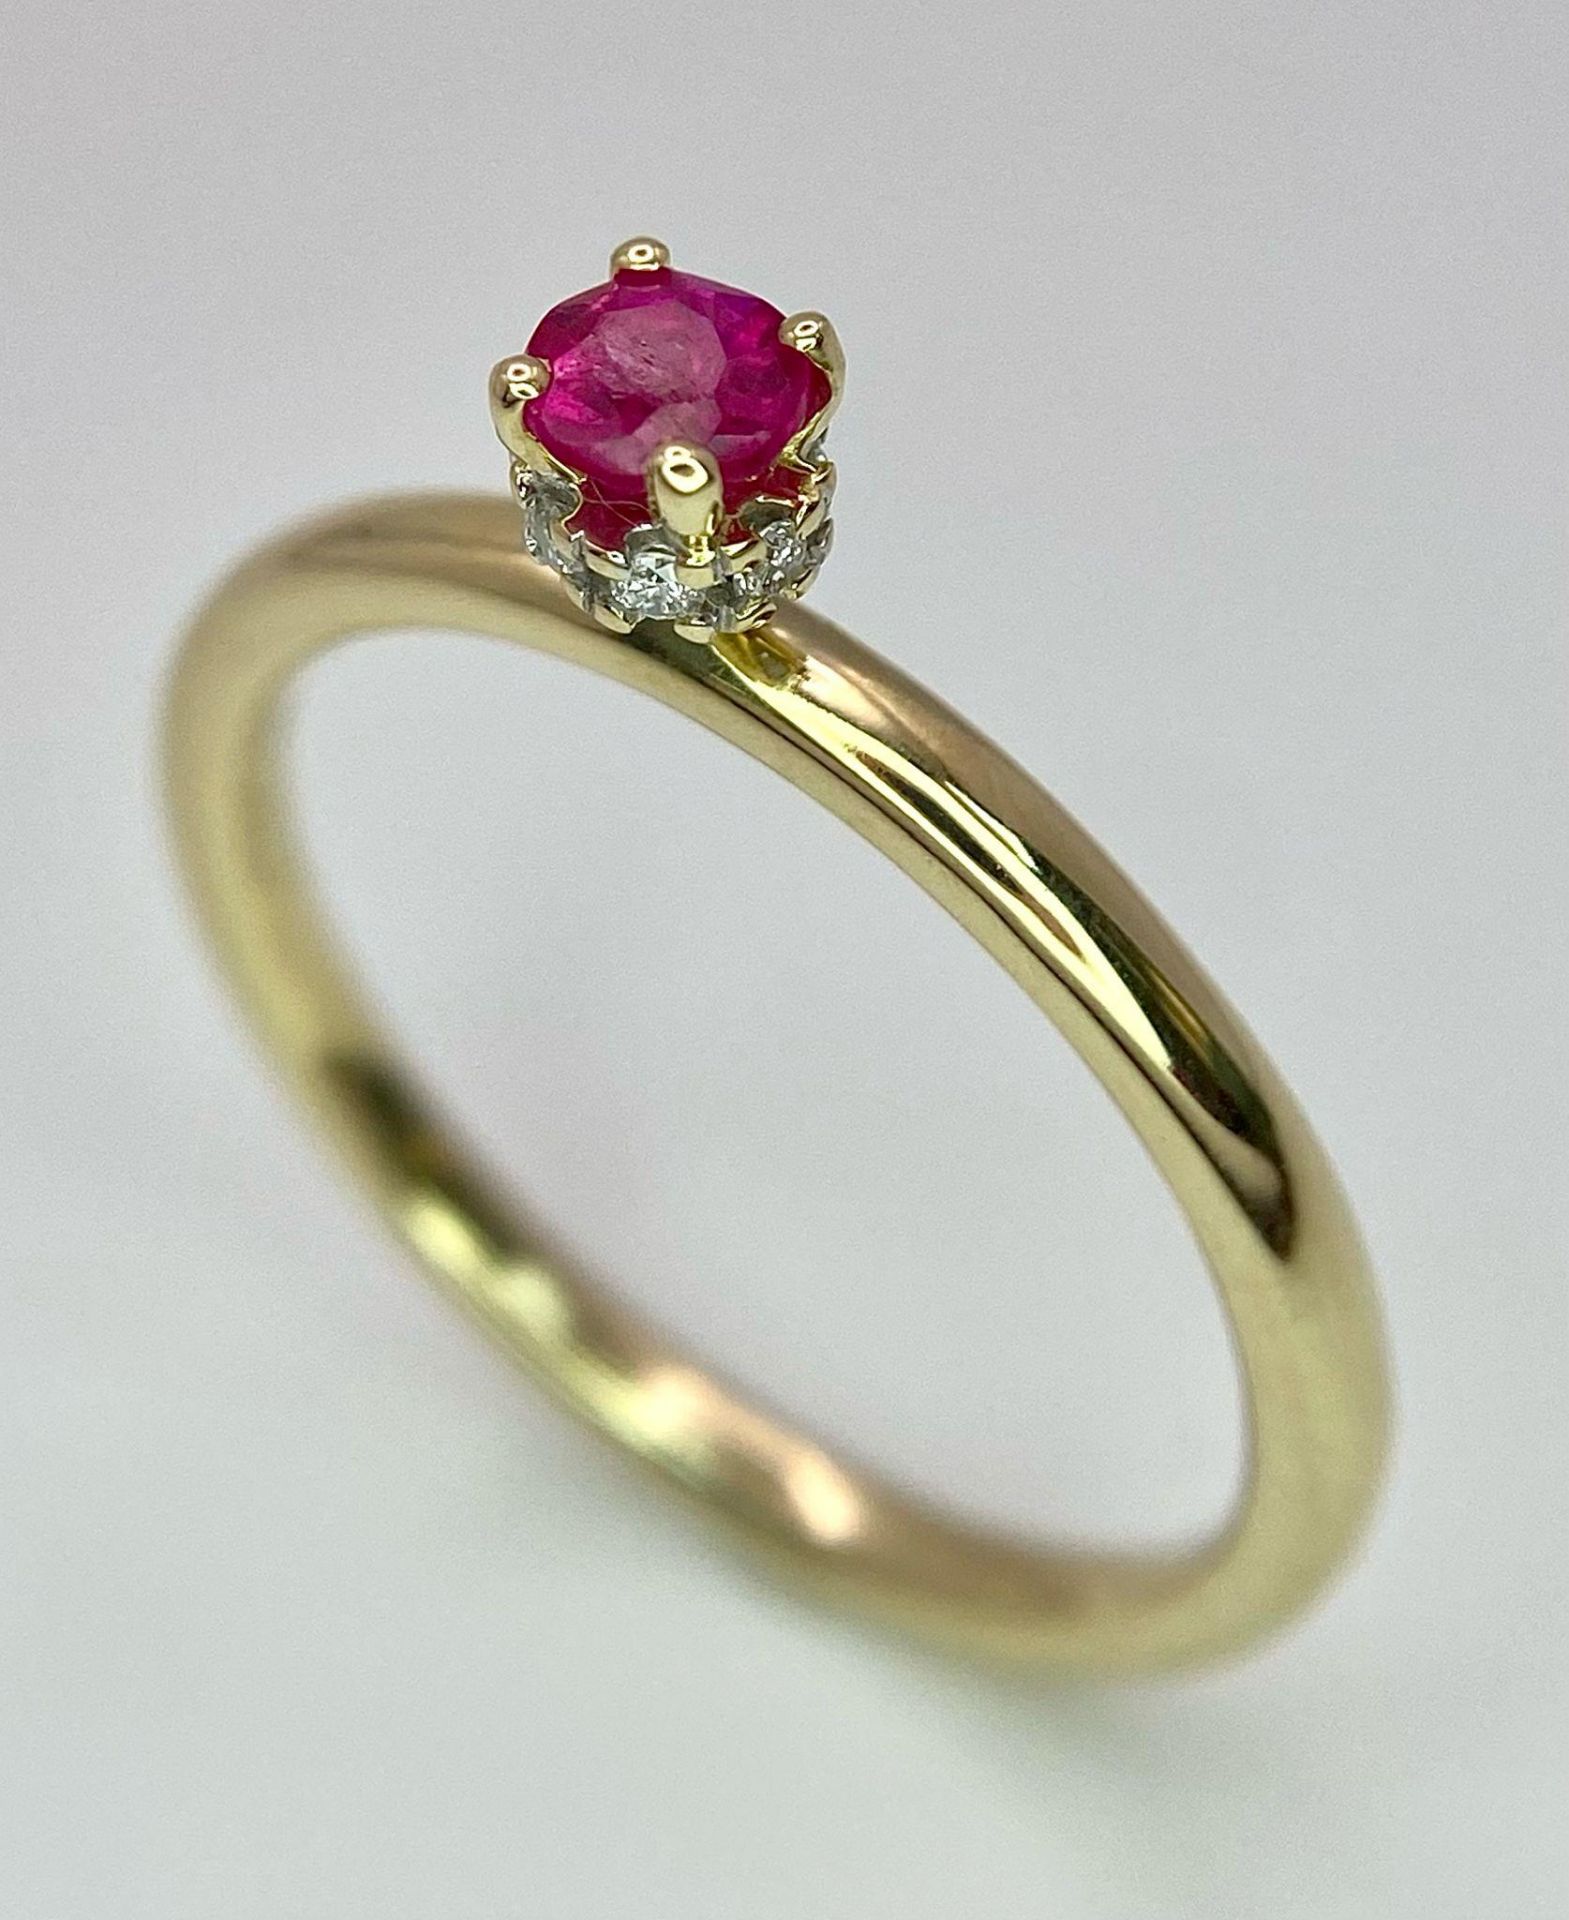 A 9K YELLOW GOLD 4 CLAW RUBY SET SOLITAIRE RING WITH DIAMOND SET HIDDEN HALO 0.27CT RUBY 2.1G SIZE O